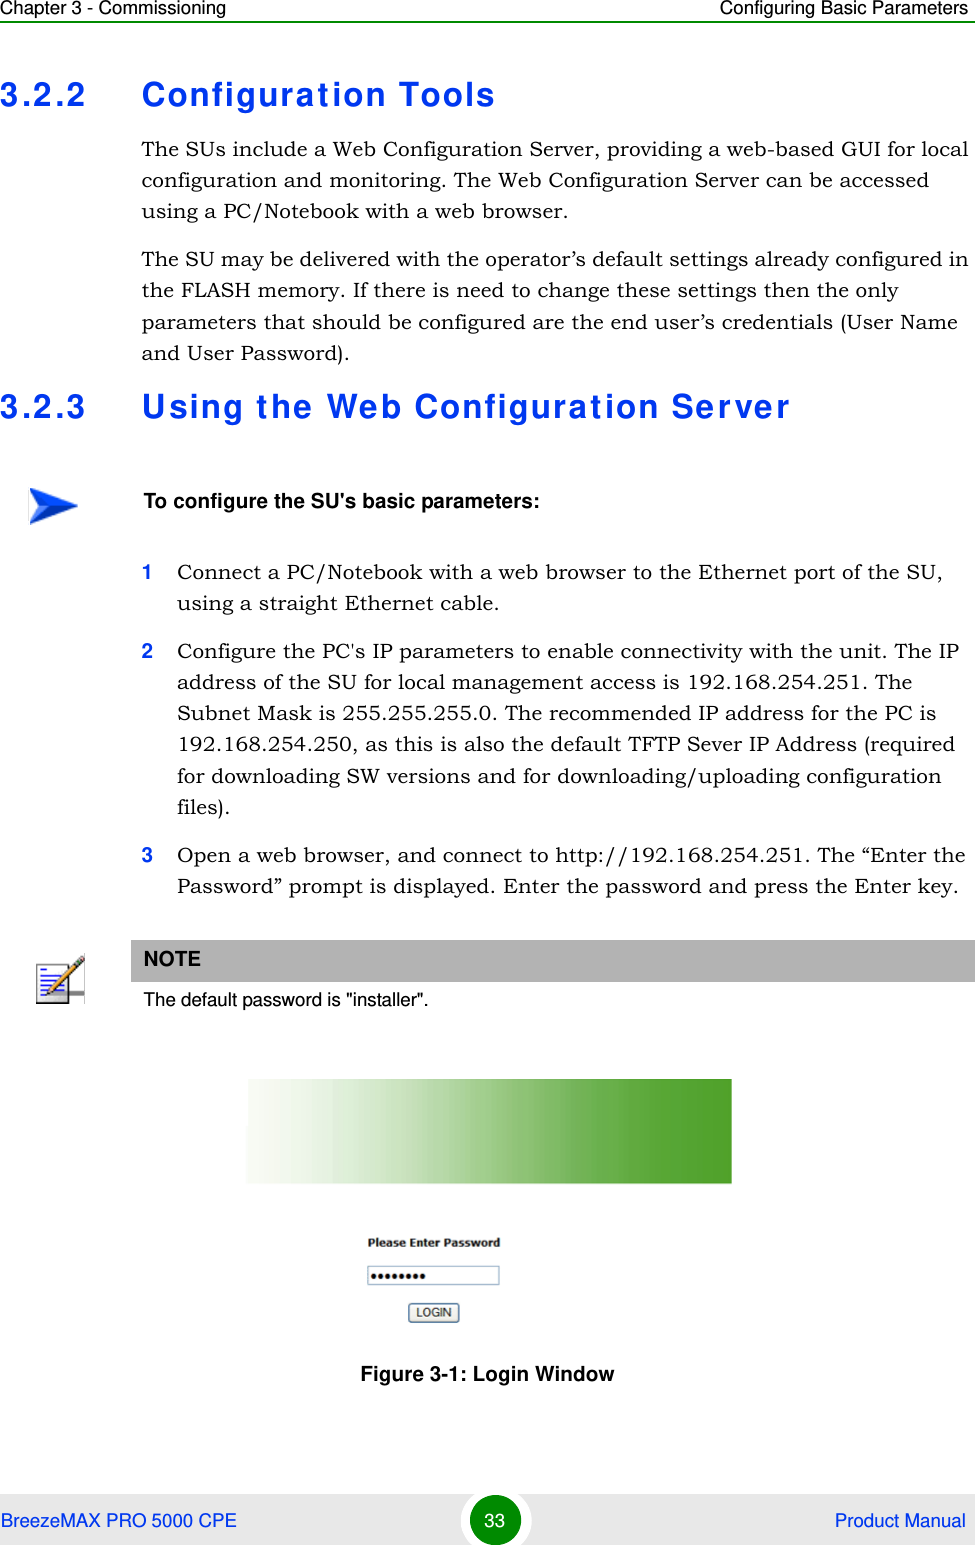 Chapter 3 - Commissioning Configuring Basic ParametersBreezeMAX PRO 5000 CPE 33  Product Manual3.2.2 Configuration ToolsThe SUs include a Web Configuration Server, providing a web-based GUI for local configuration and monitoring. The Web Configuration Server can be accessed using a PC/Notebook with a web browser.The SU may be delivered with the operator’s default settings already configured in the FLASH memory. If there is need to change these settings then the only parameters that should be configured are the end user’s credentials (User Name and User Password).3.2.3 Using the Web Configuration Server1Connect a PC/Notebook with a web browser to the Ethernet port of the SU, using a straight Ethernet cable.2Configure the PC&apos;s IP parameters to enable connectivity with the unit. The IP address of the SU for local management access is 192.168.254.251. The Subnet Mask is 255.255.255.0. The recommended IP address for the PC is 192.168.254.250, as this is also the default TFTP Sever IP Address (required for downloading SW versions and for downloading/uploading configuration files). 3Open a web browser, and connect to http://192.168.254.251. The “Enter the Password” prompt is displayed. Enter the password and press the Enter key.To configure the SU&apos;s basic parameters:NOTEThe default password is &quot;installer&quot;.Figure 3-1: Login Window